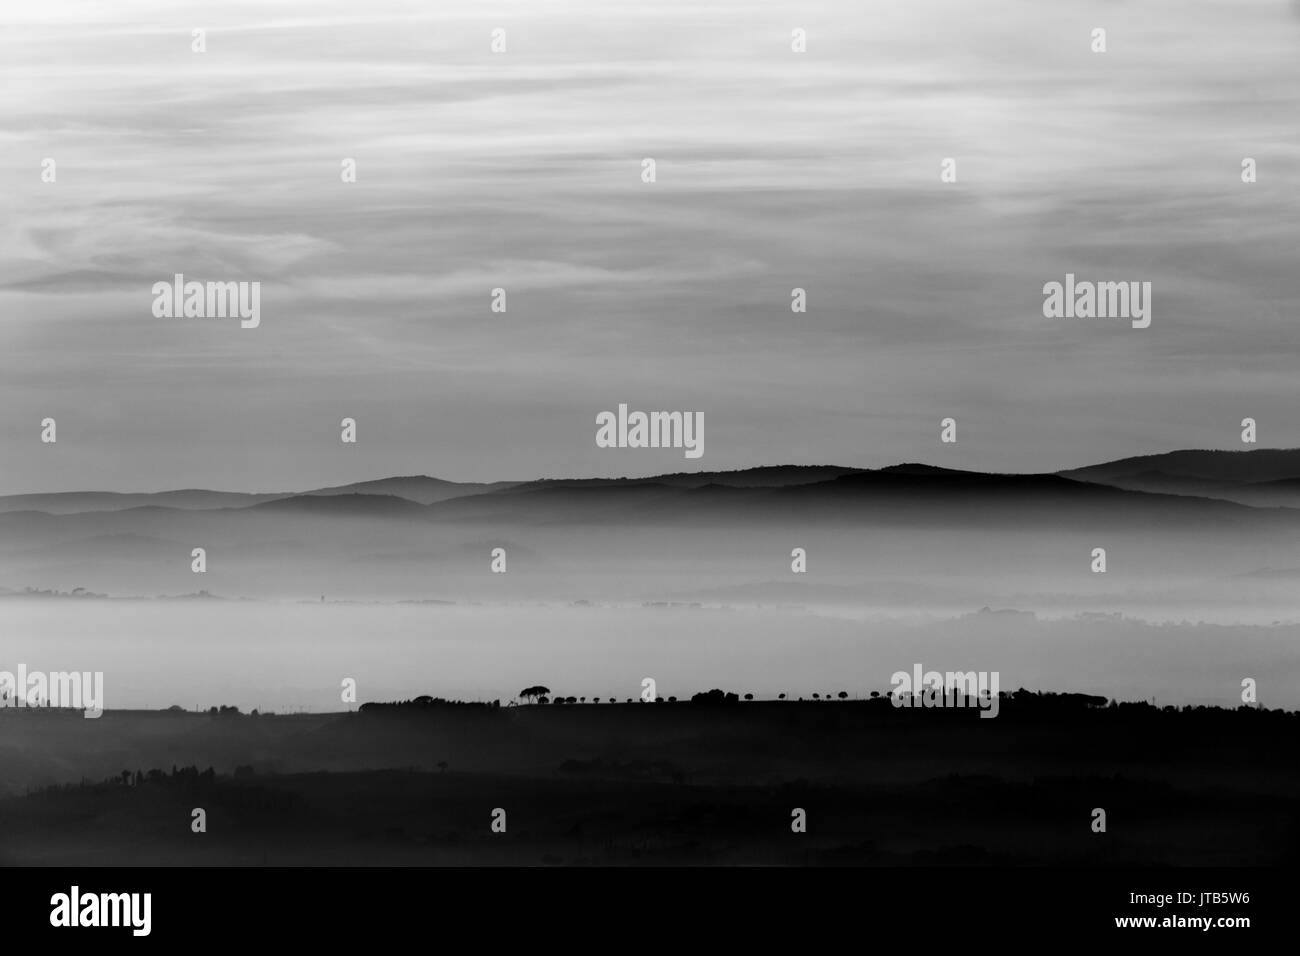 A view of some trees on top of a hill with a background of fog and distant mountains Stock Photo